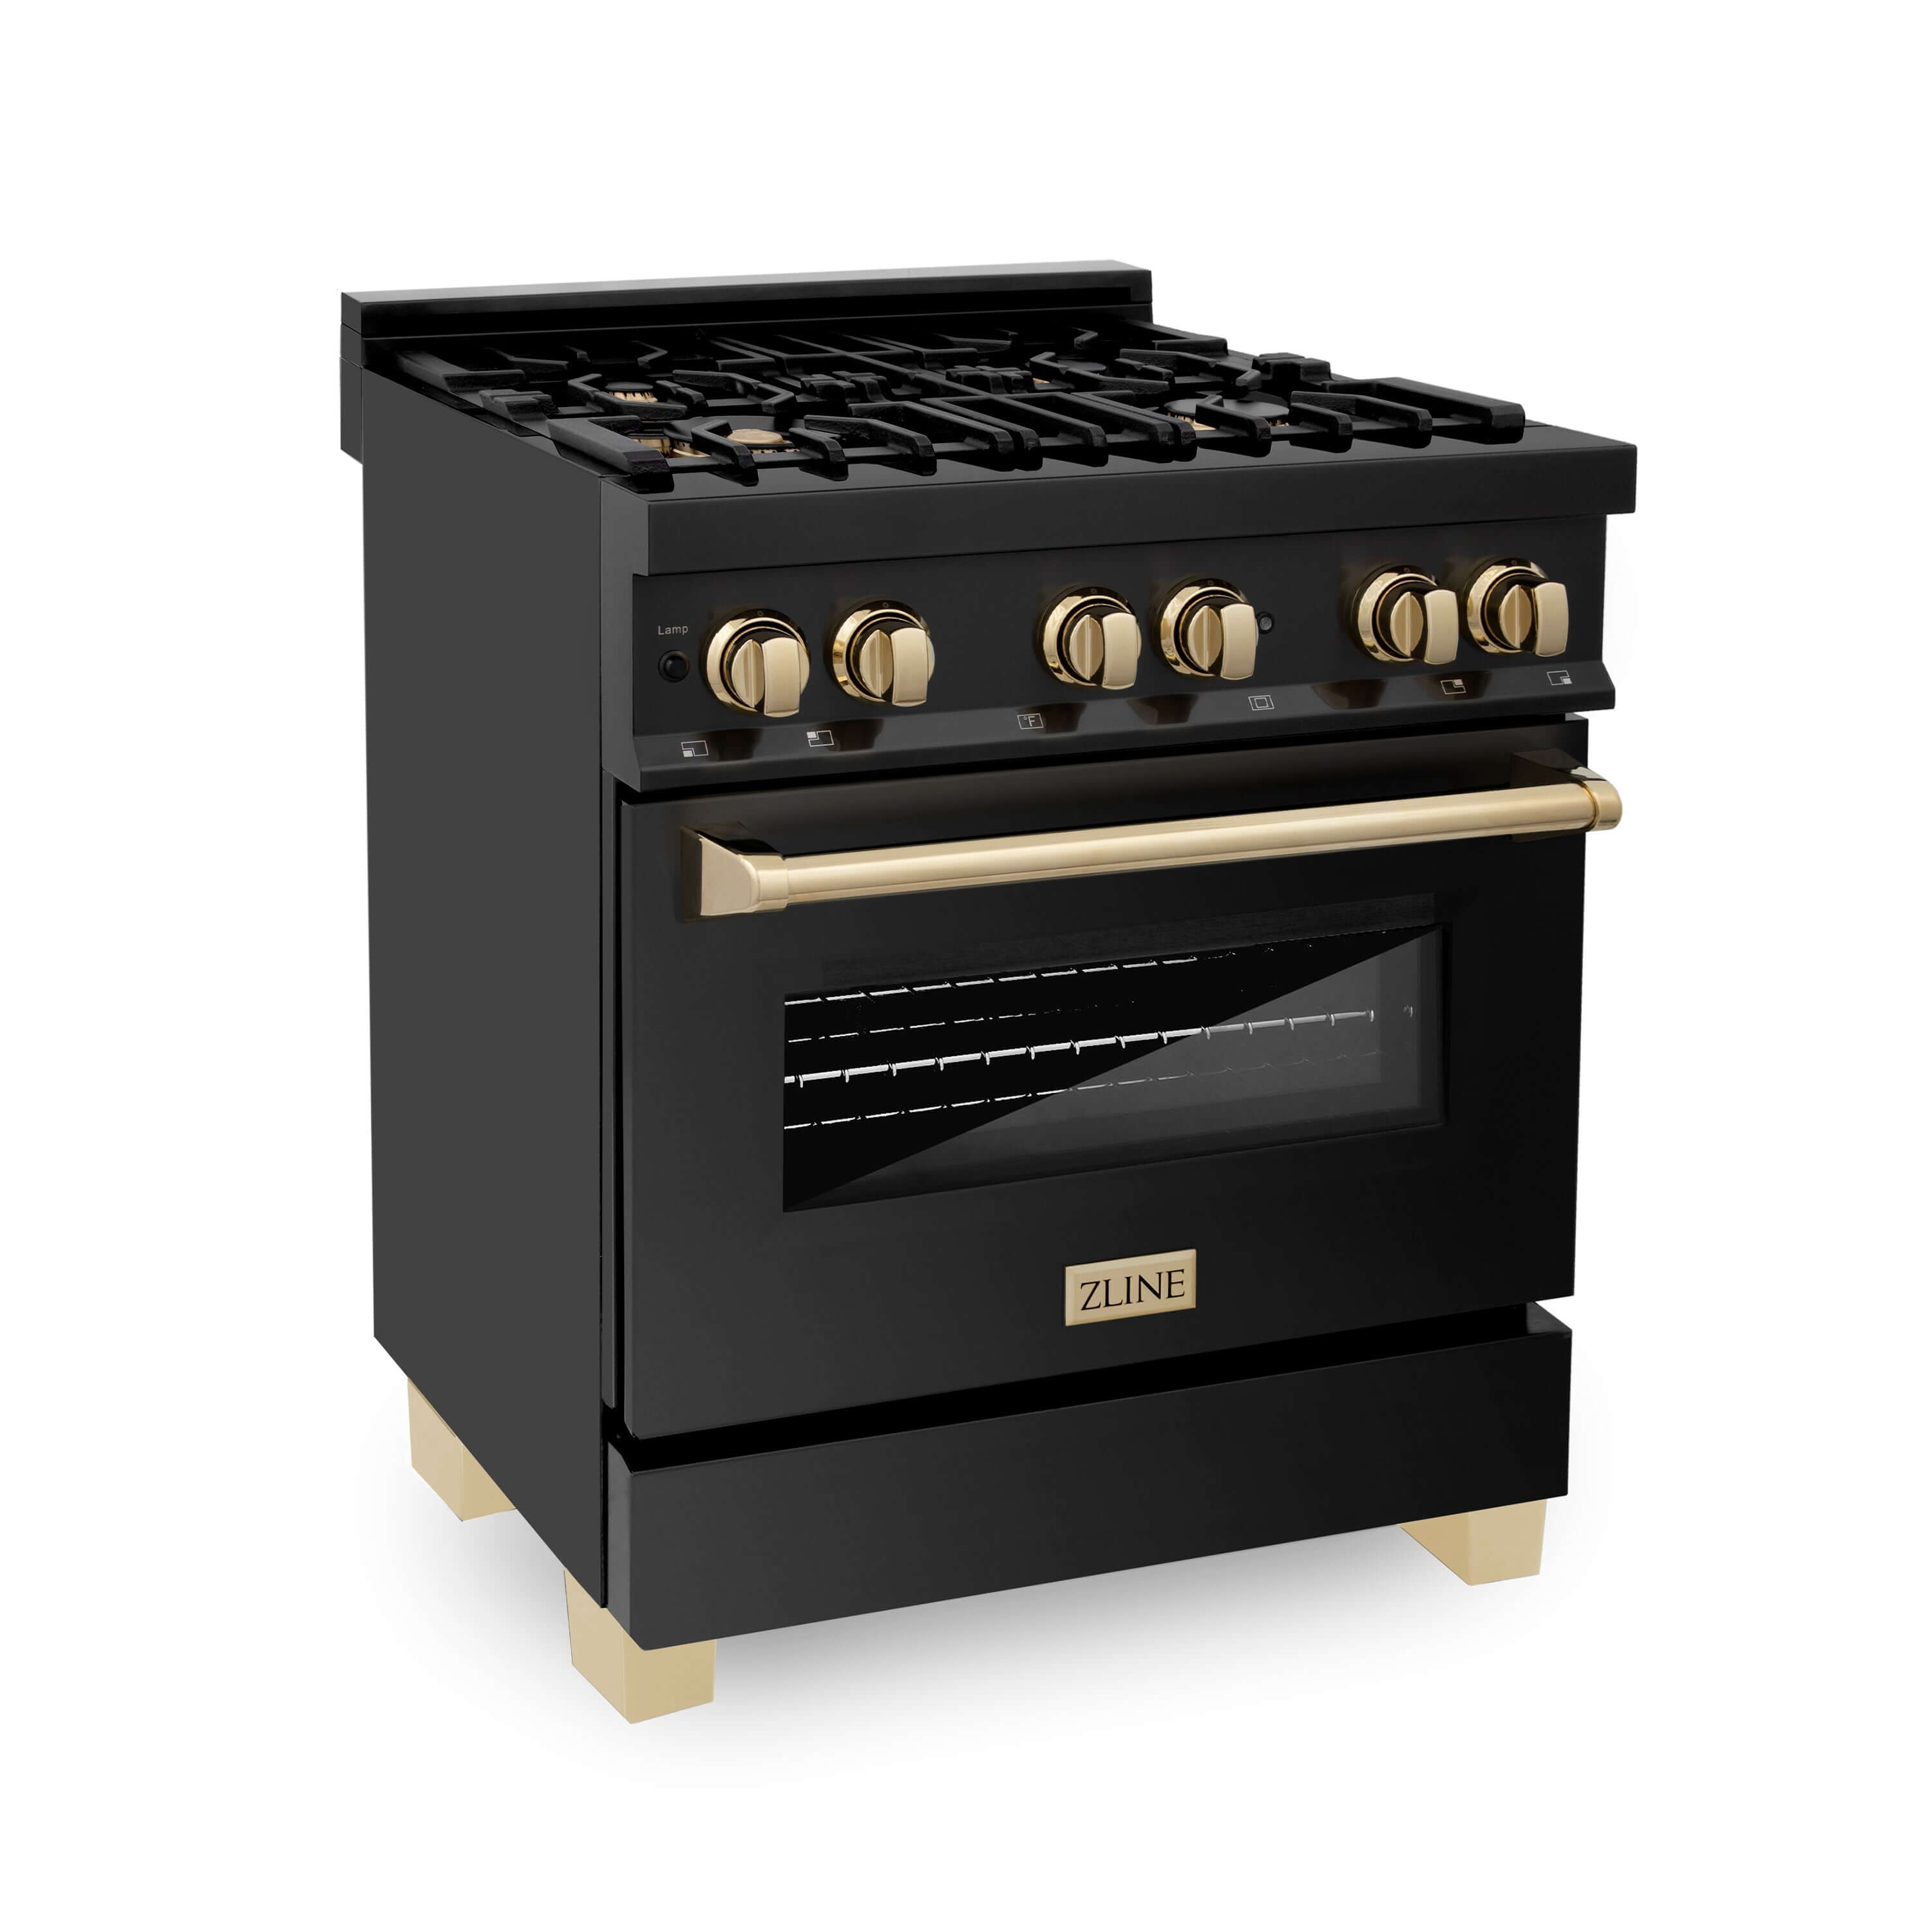 ZLINE Autograph Edition 30" Black Stainless Steel Dual Fuel Range with Polished Gold accents (RABZ-30-G)